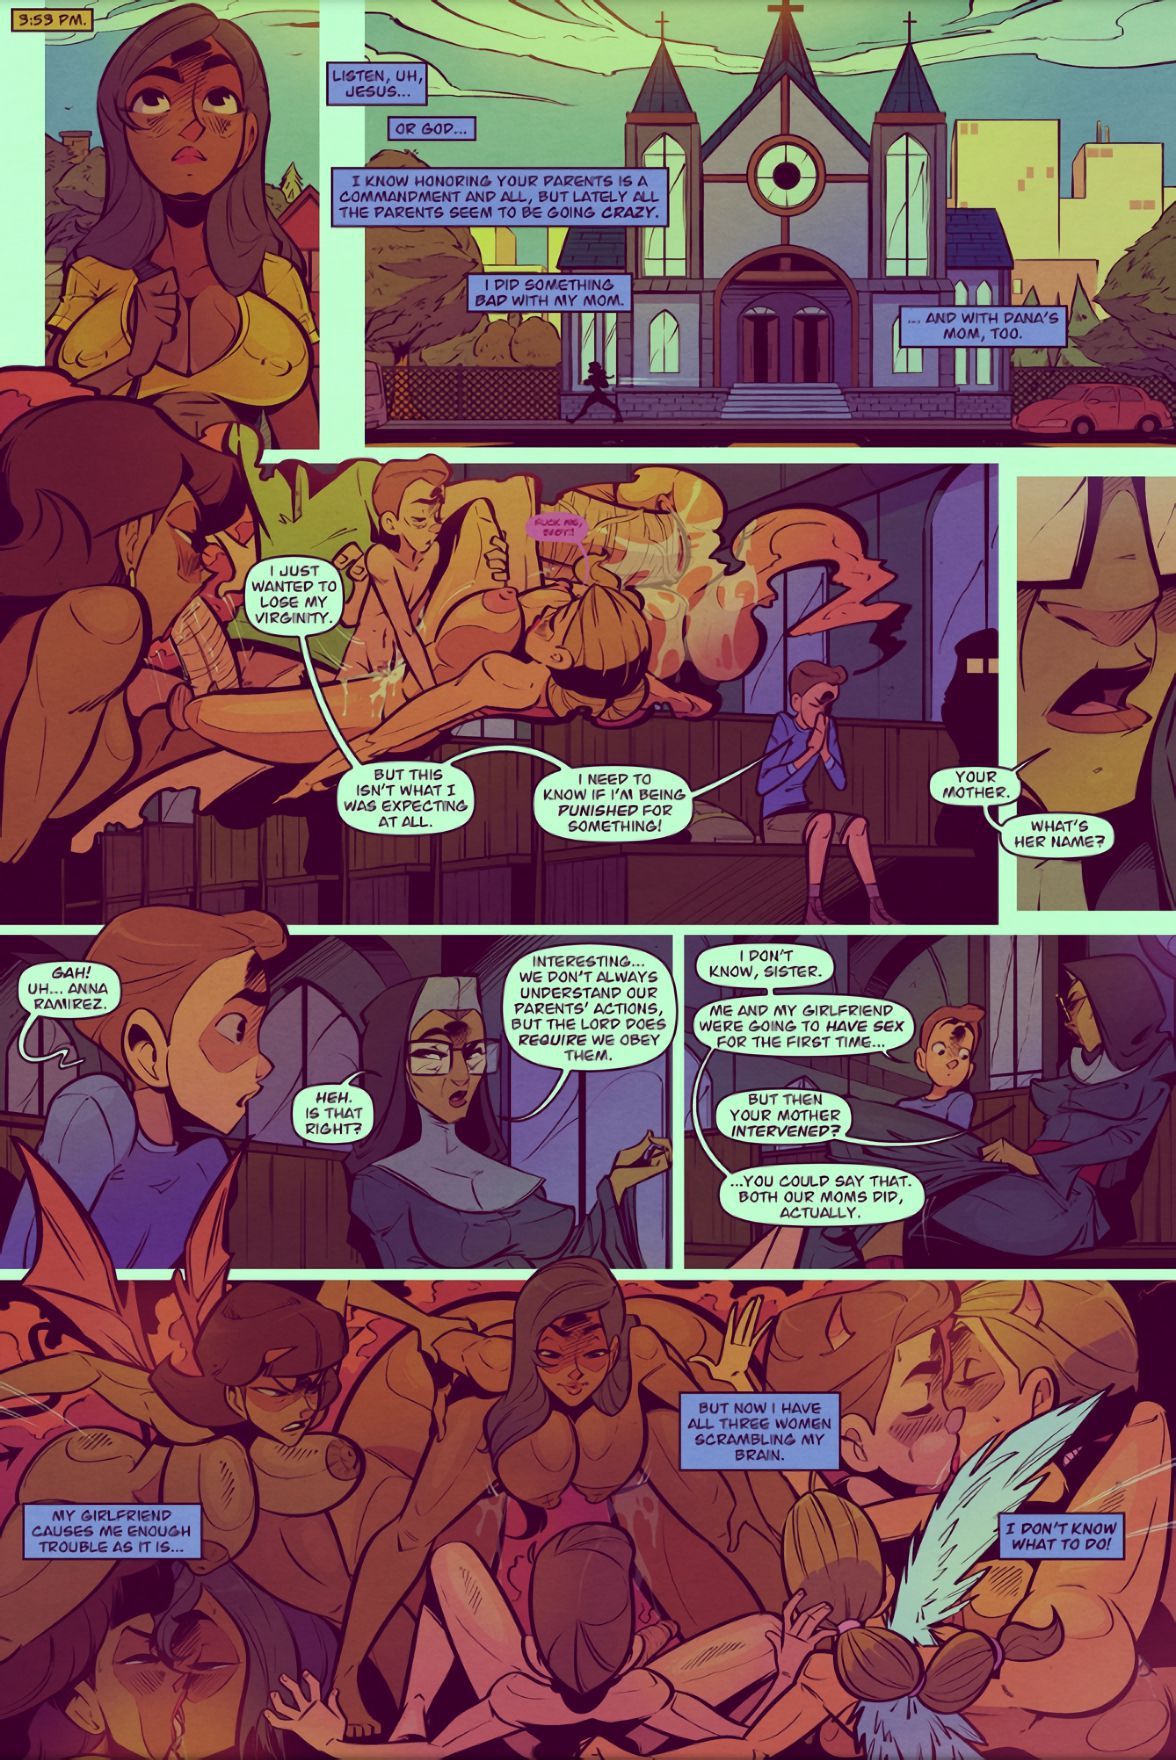 DNA 3 - MadeFromLazers [Ongoing] 9